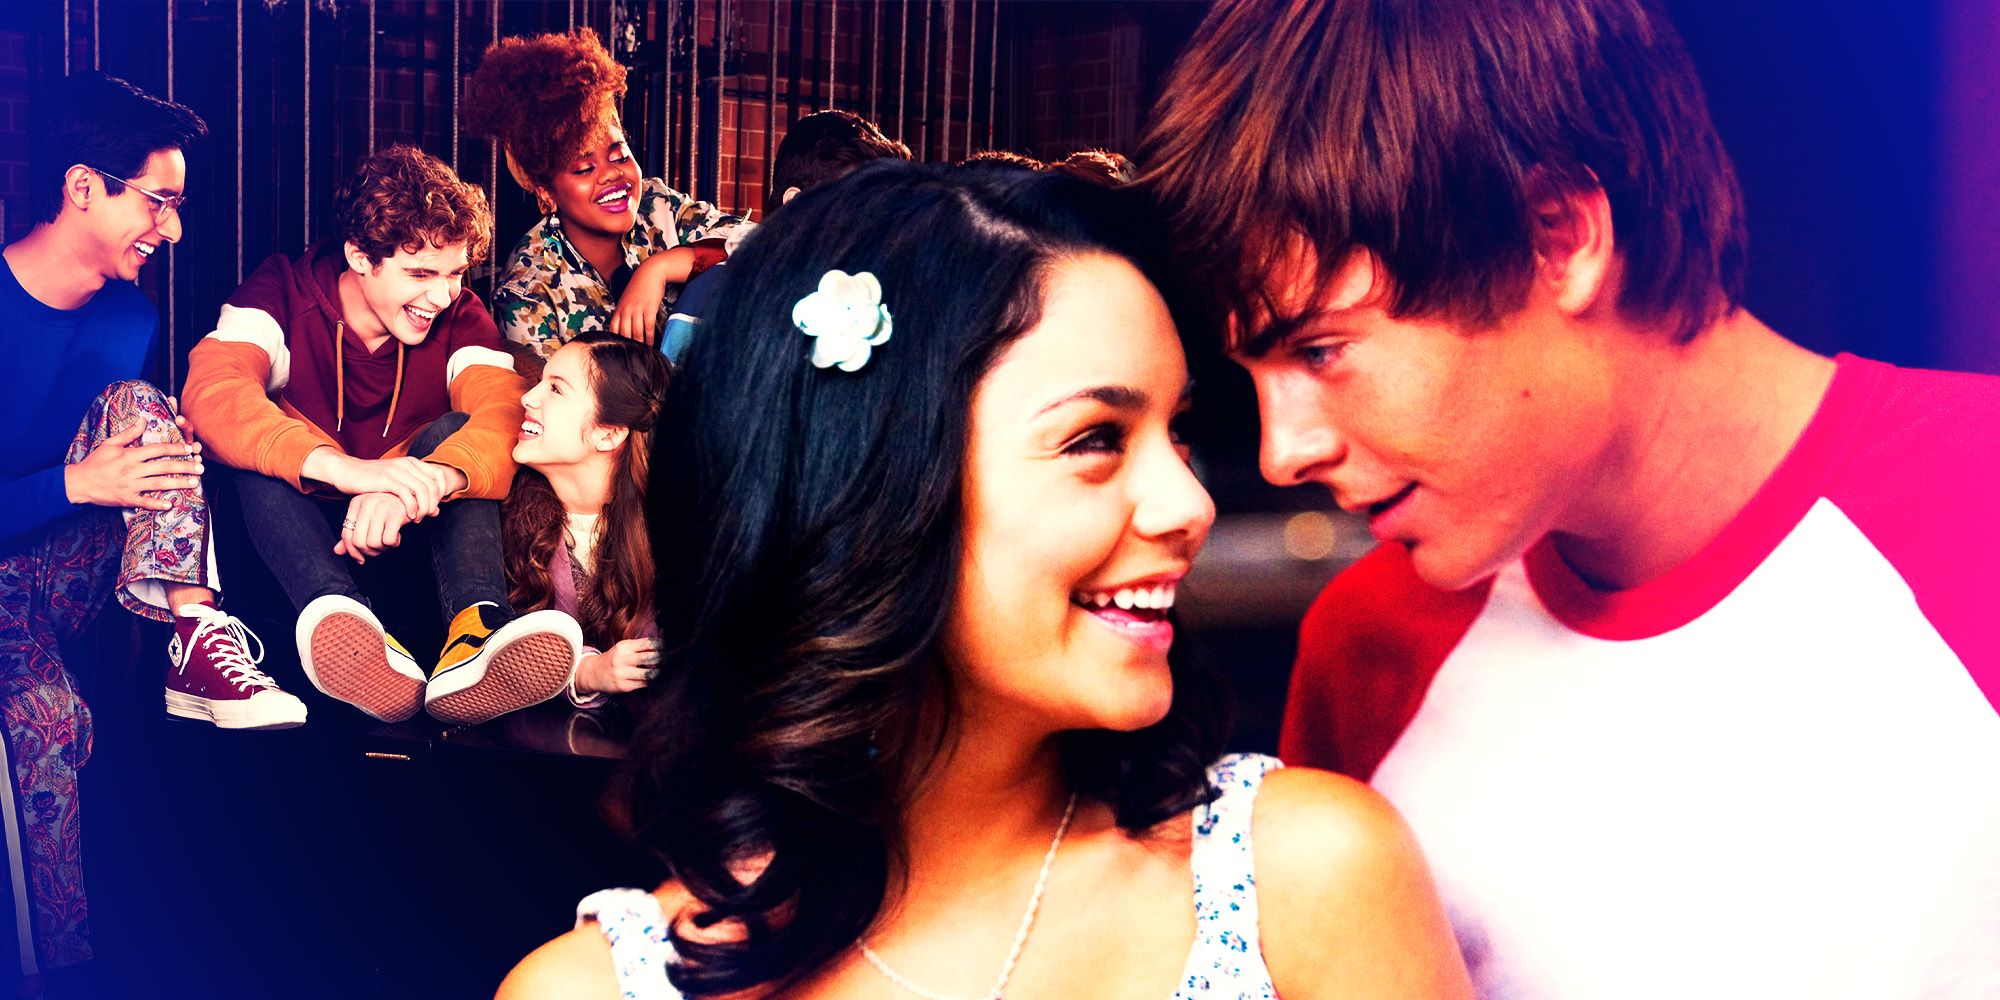 Troy and Gabriella in High School Musical 2 and the High School Musical: The Musical: The Series cast.